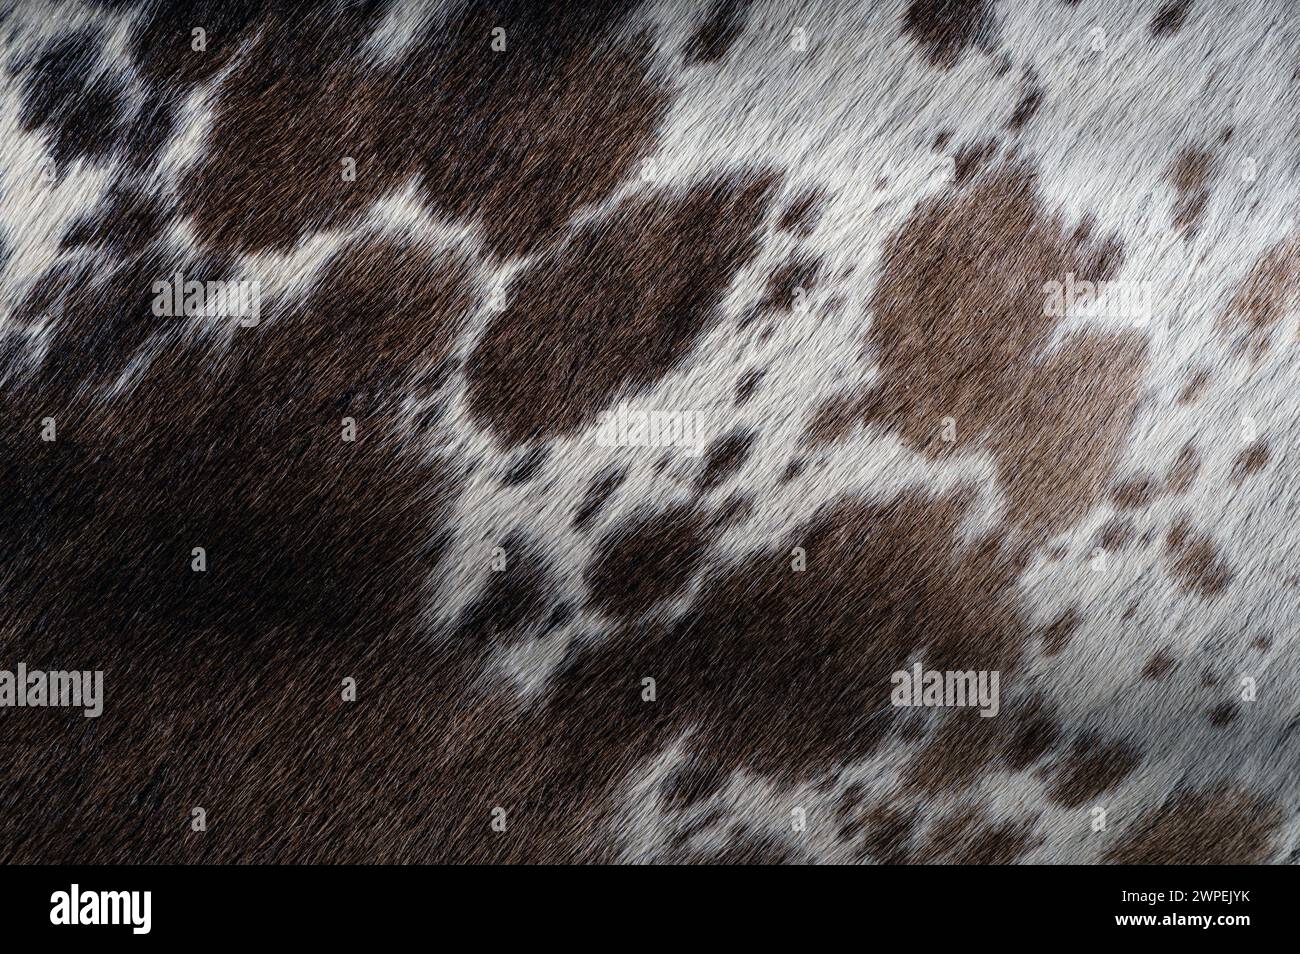 Pattern of cow fur texture macro close up view with spots Stock Photo